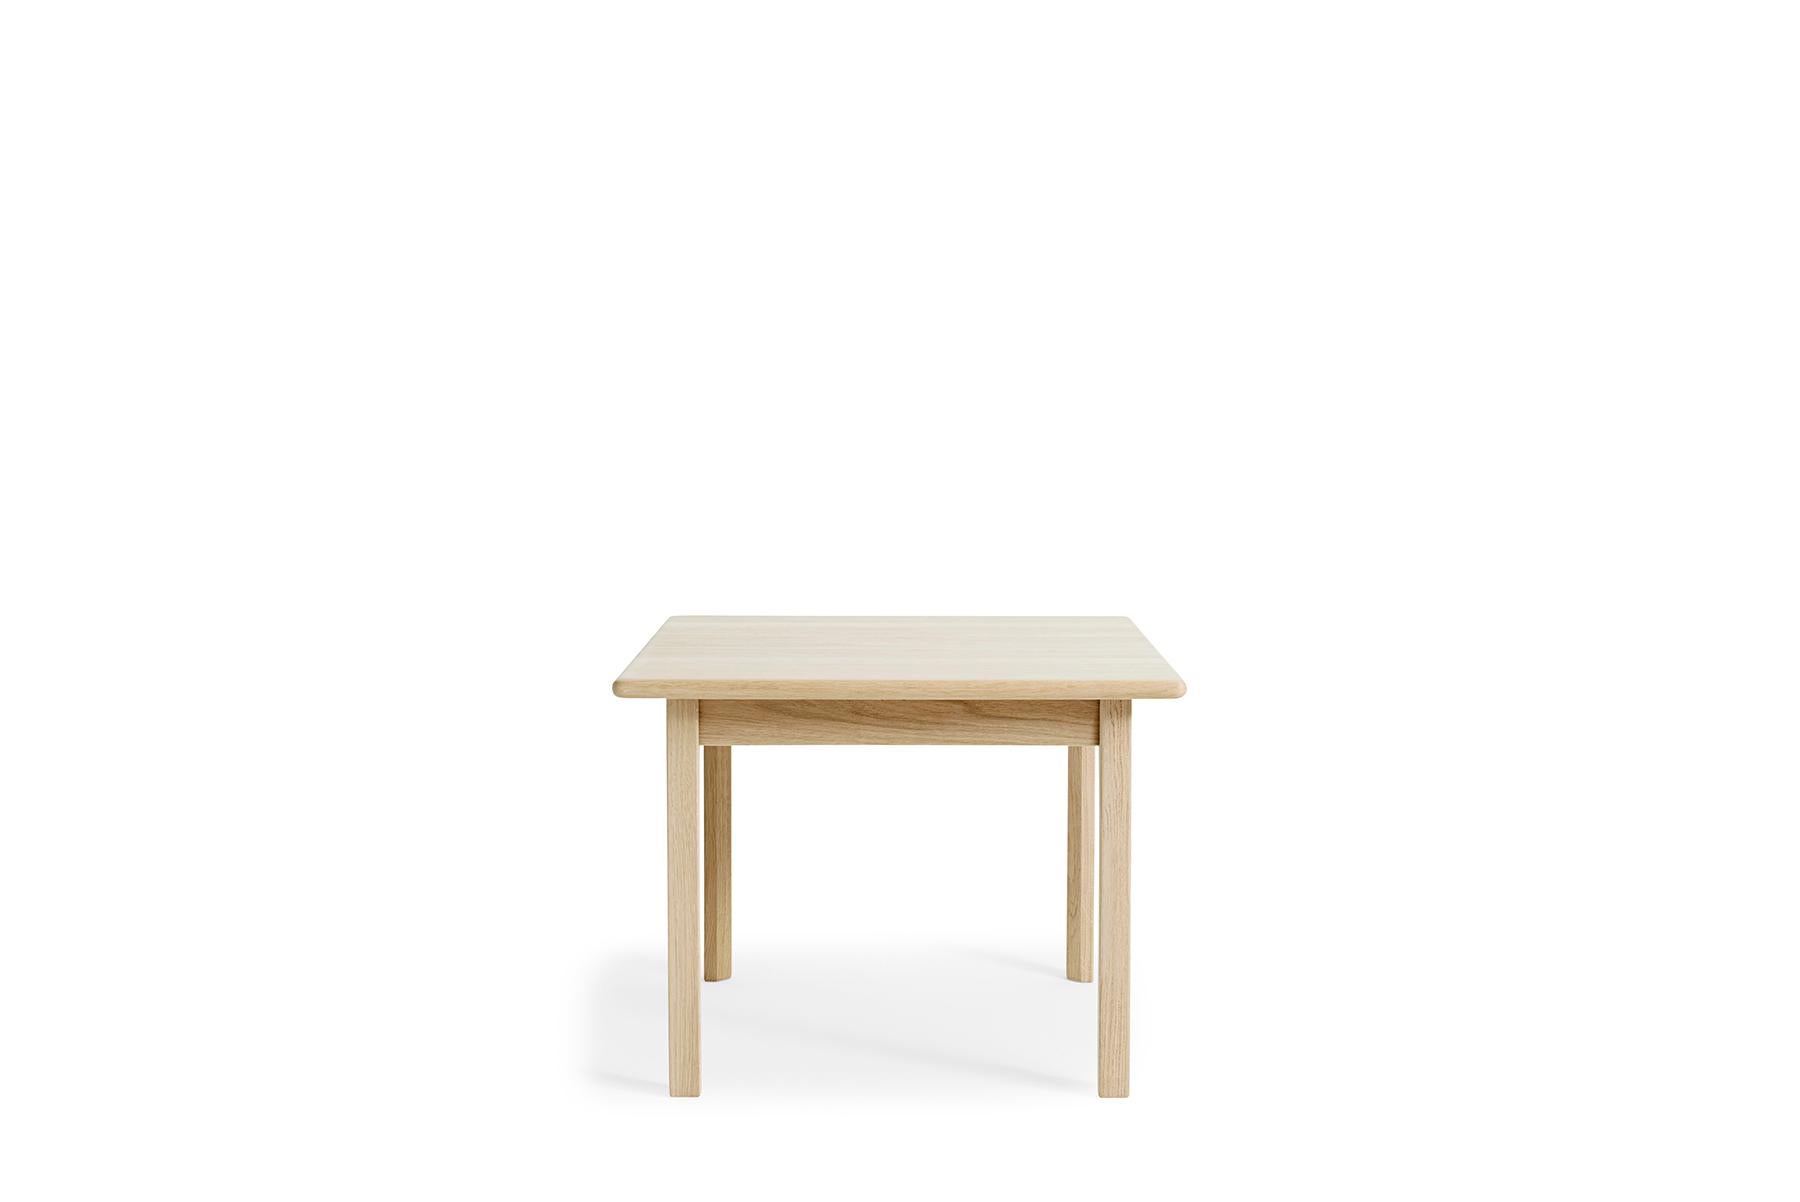 Designed by Hans Wegner for GETAMA in 1980, the 80/86 coffee table features unparalleled craftsmanship. This table is hand built at GETAMA’s factory in Gedsted, Denmark by skilled cabinetmakers using traditional Scandinavian techniques.

Lead